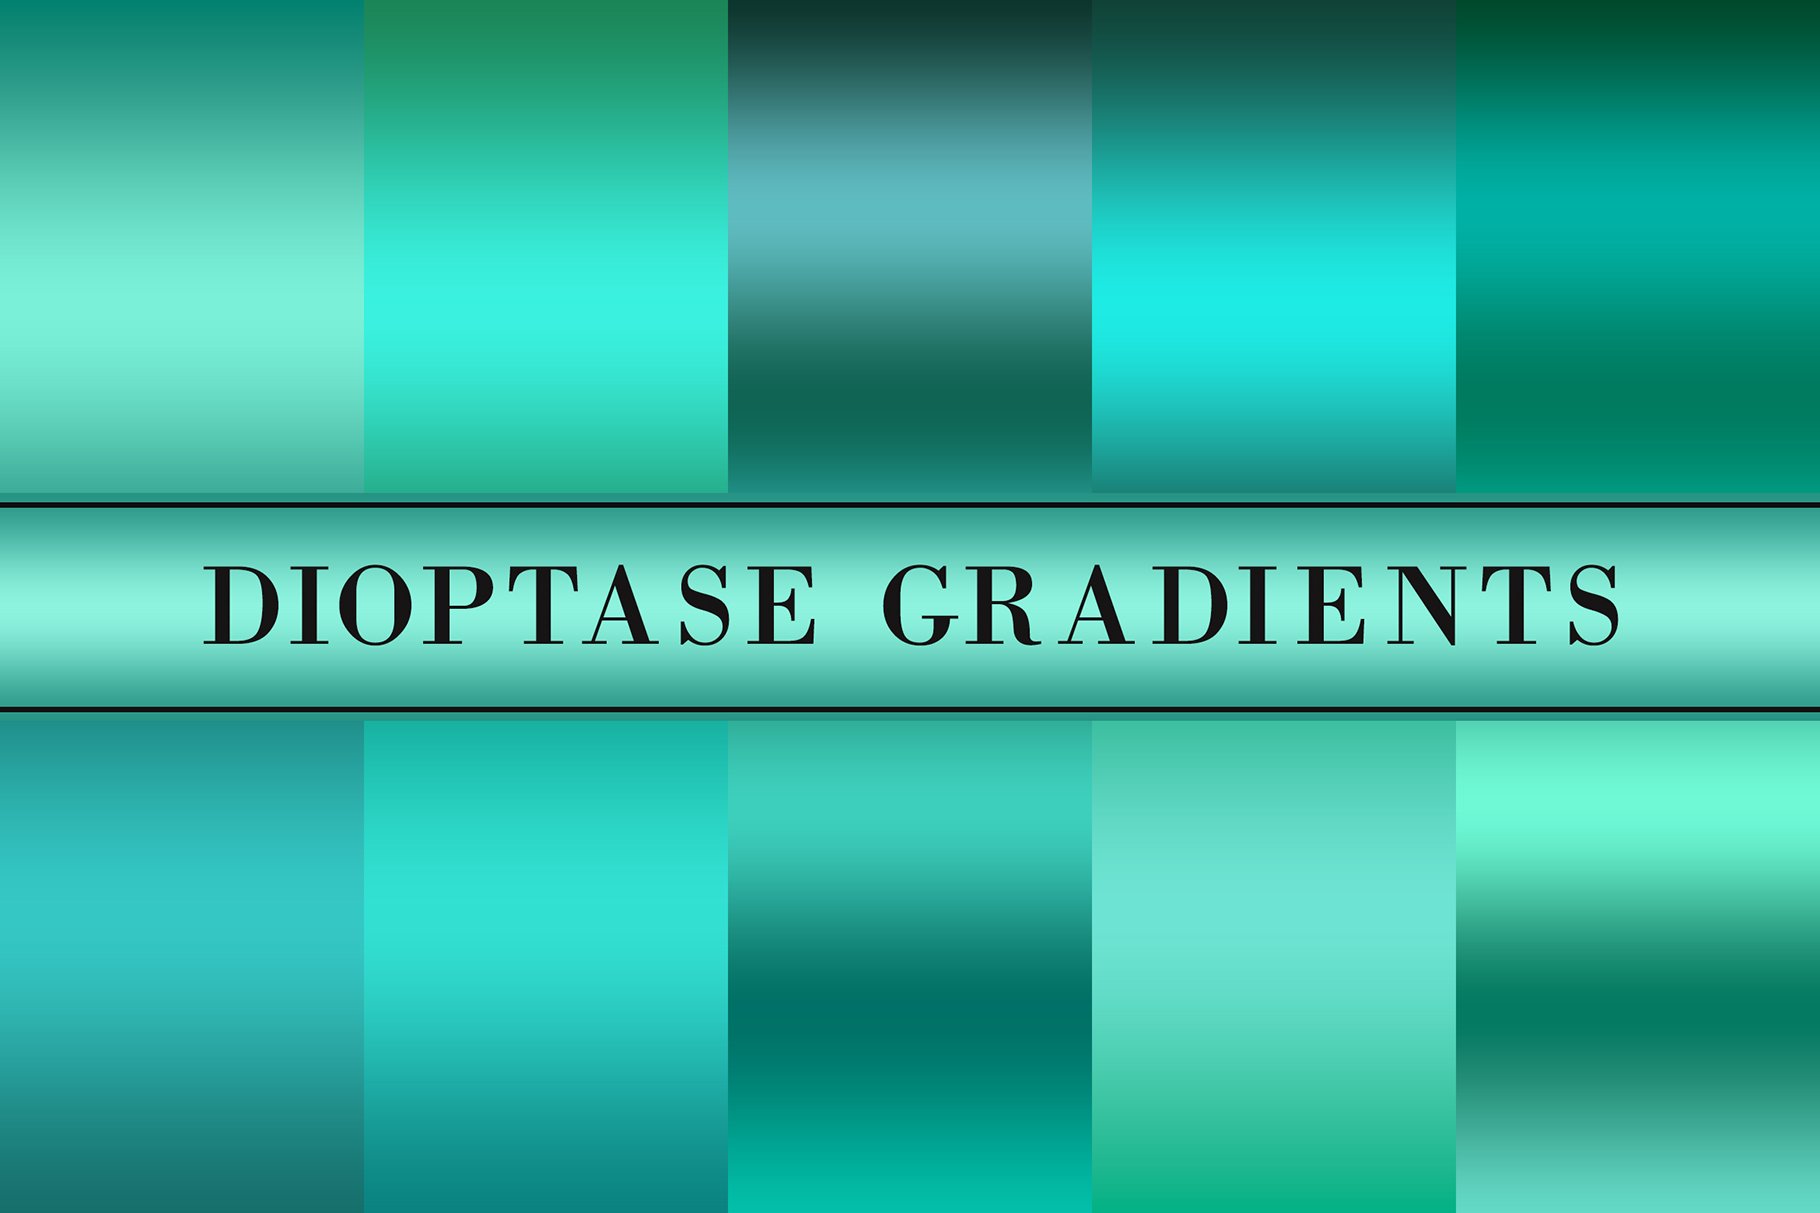 Dioptase Gradients cover image.